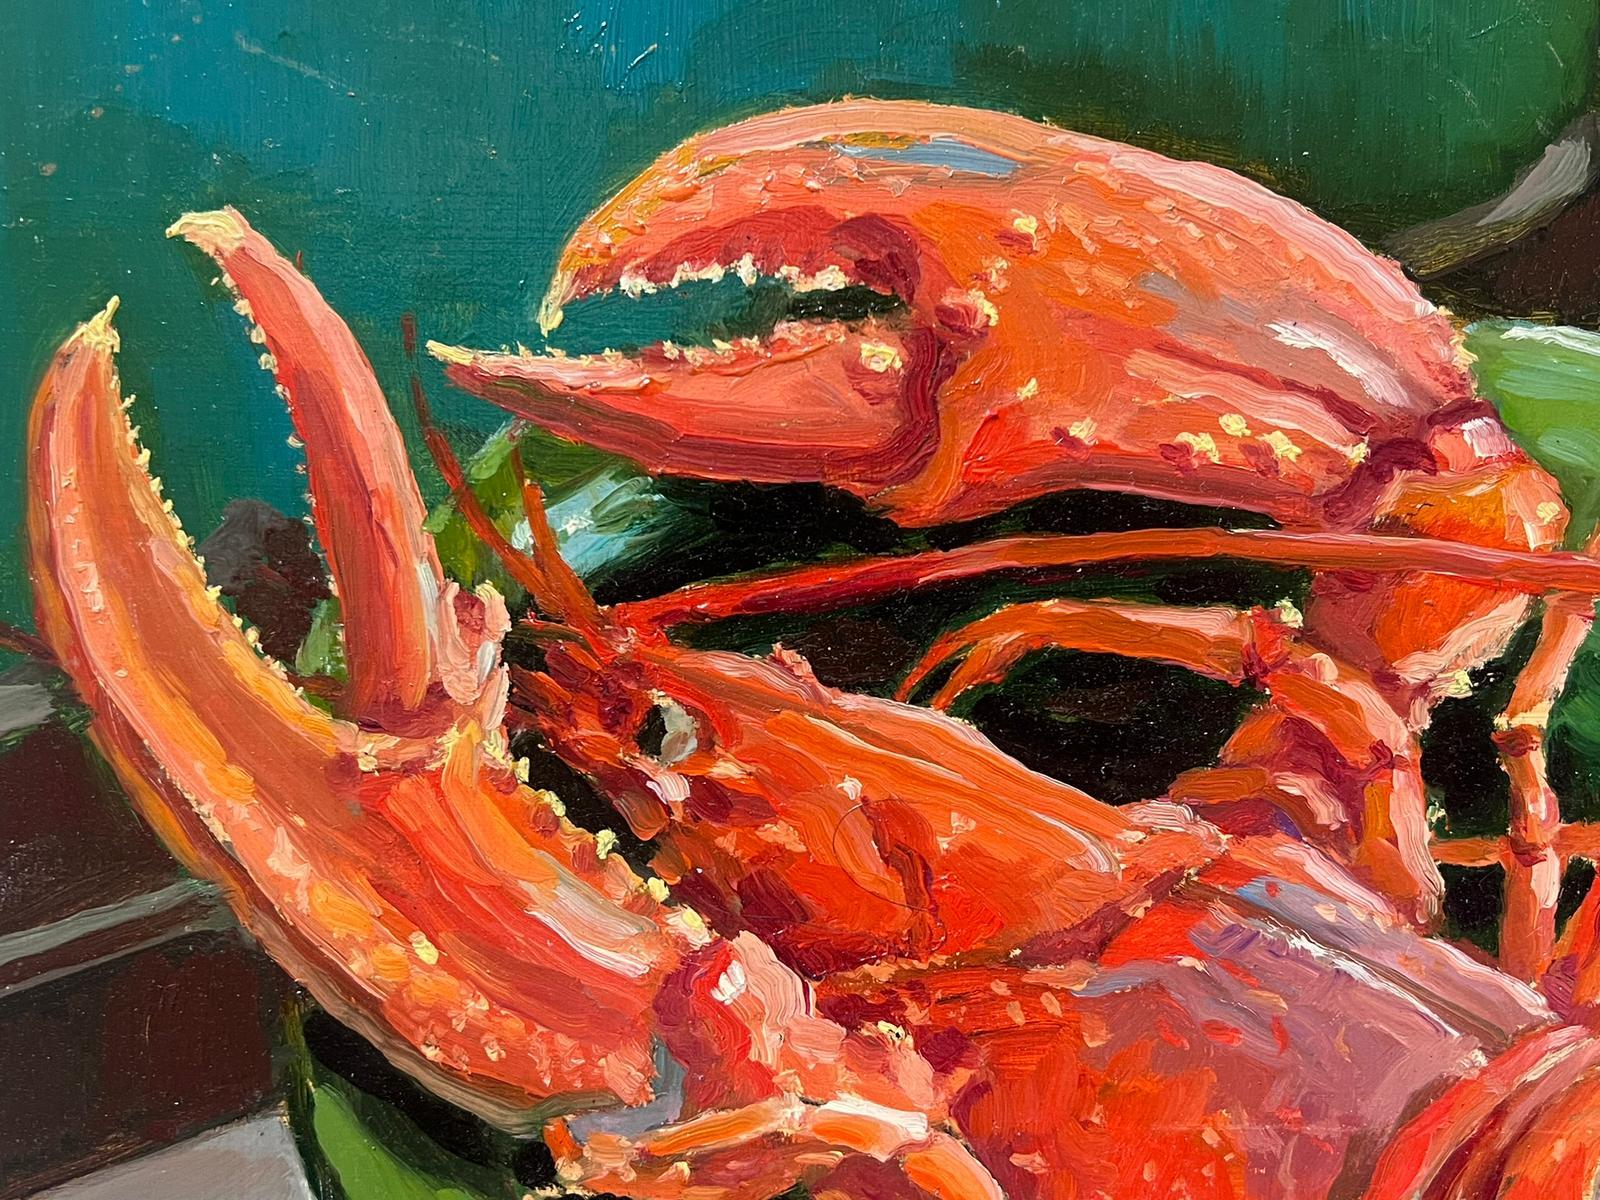 The Red Lobster
by Georges Bordonave (French contemporary) 
dated 1984
signed oil painting on board, unframed
board: 13 x 16 inches
condition: very good
provenance: from a large private collection of this artists work, western Paris, France. 